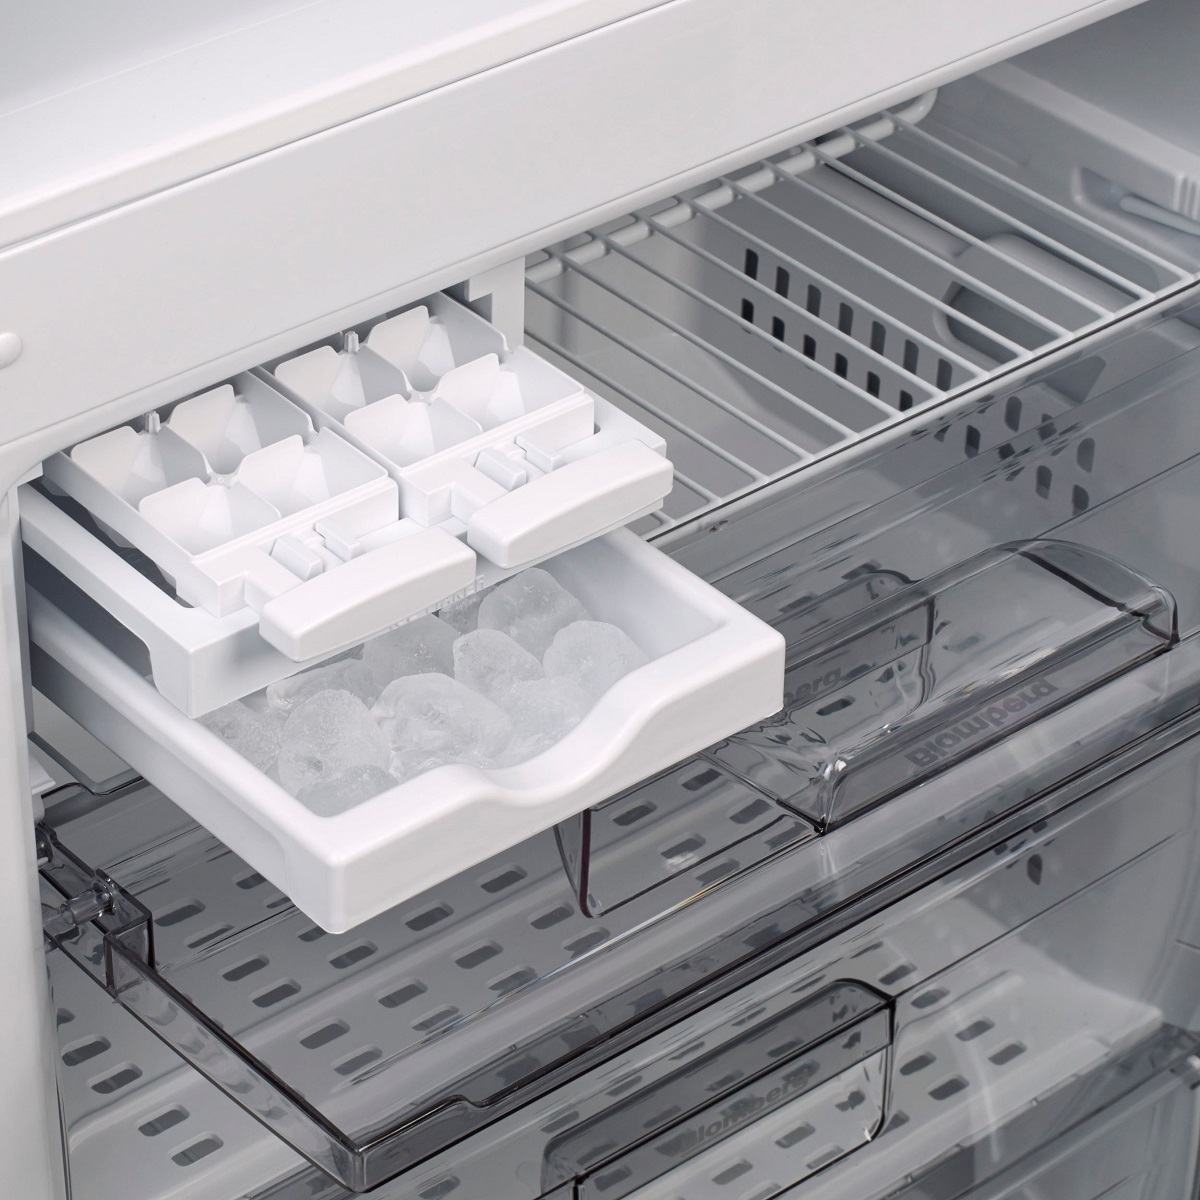 How To Turn On Ice Maker On Blomberg Refrigerator